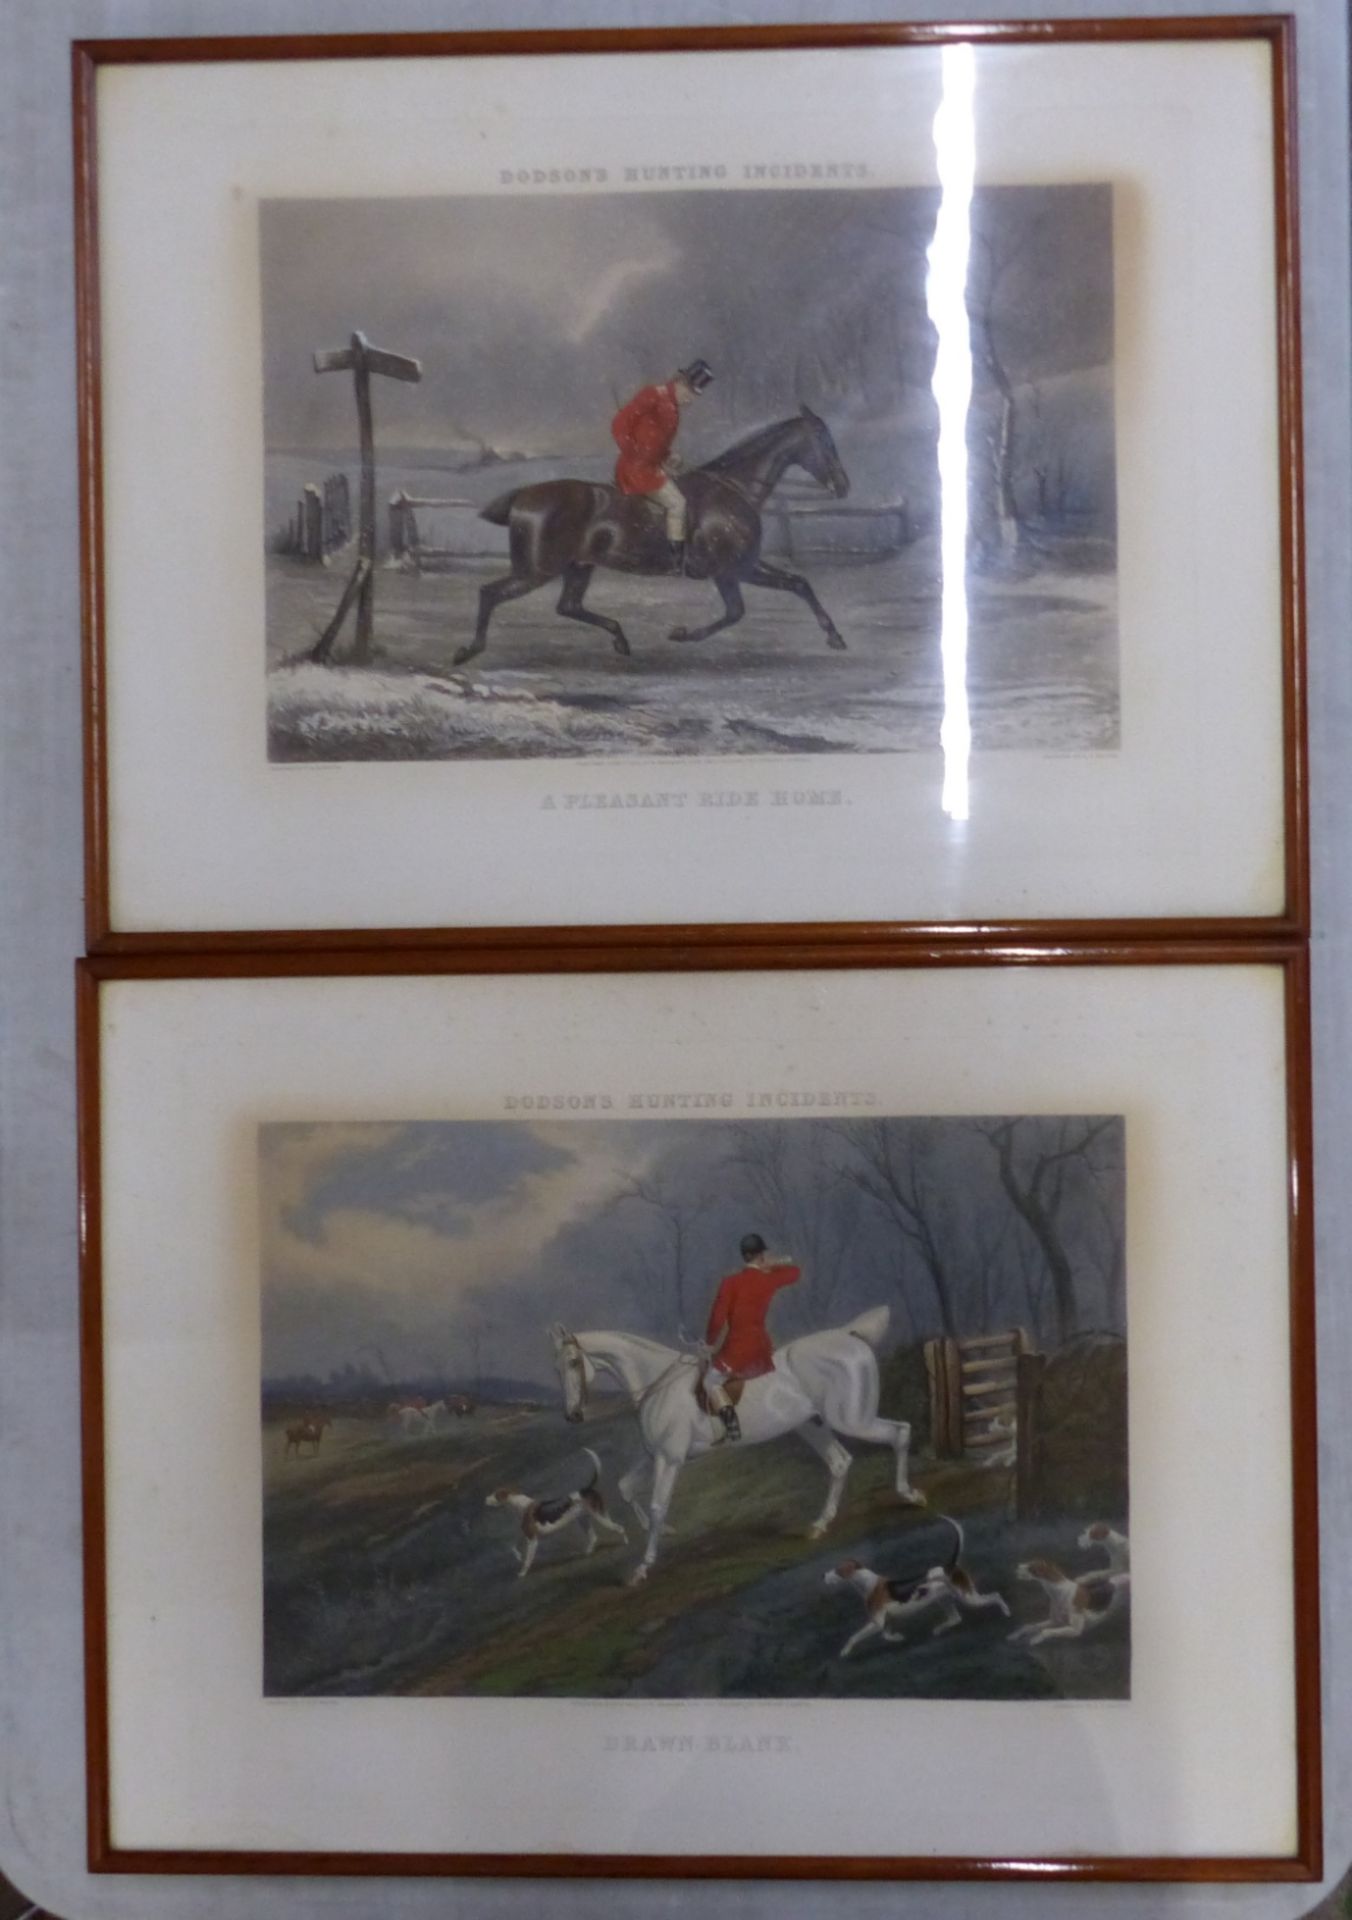 Two Colour Engravings by E. C. Hester after T. N. H. Walsh from Dodsons Hunting Incidents Series